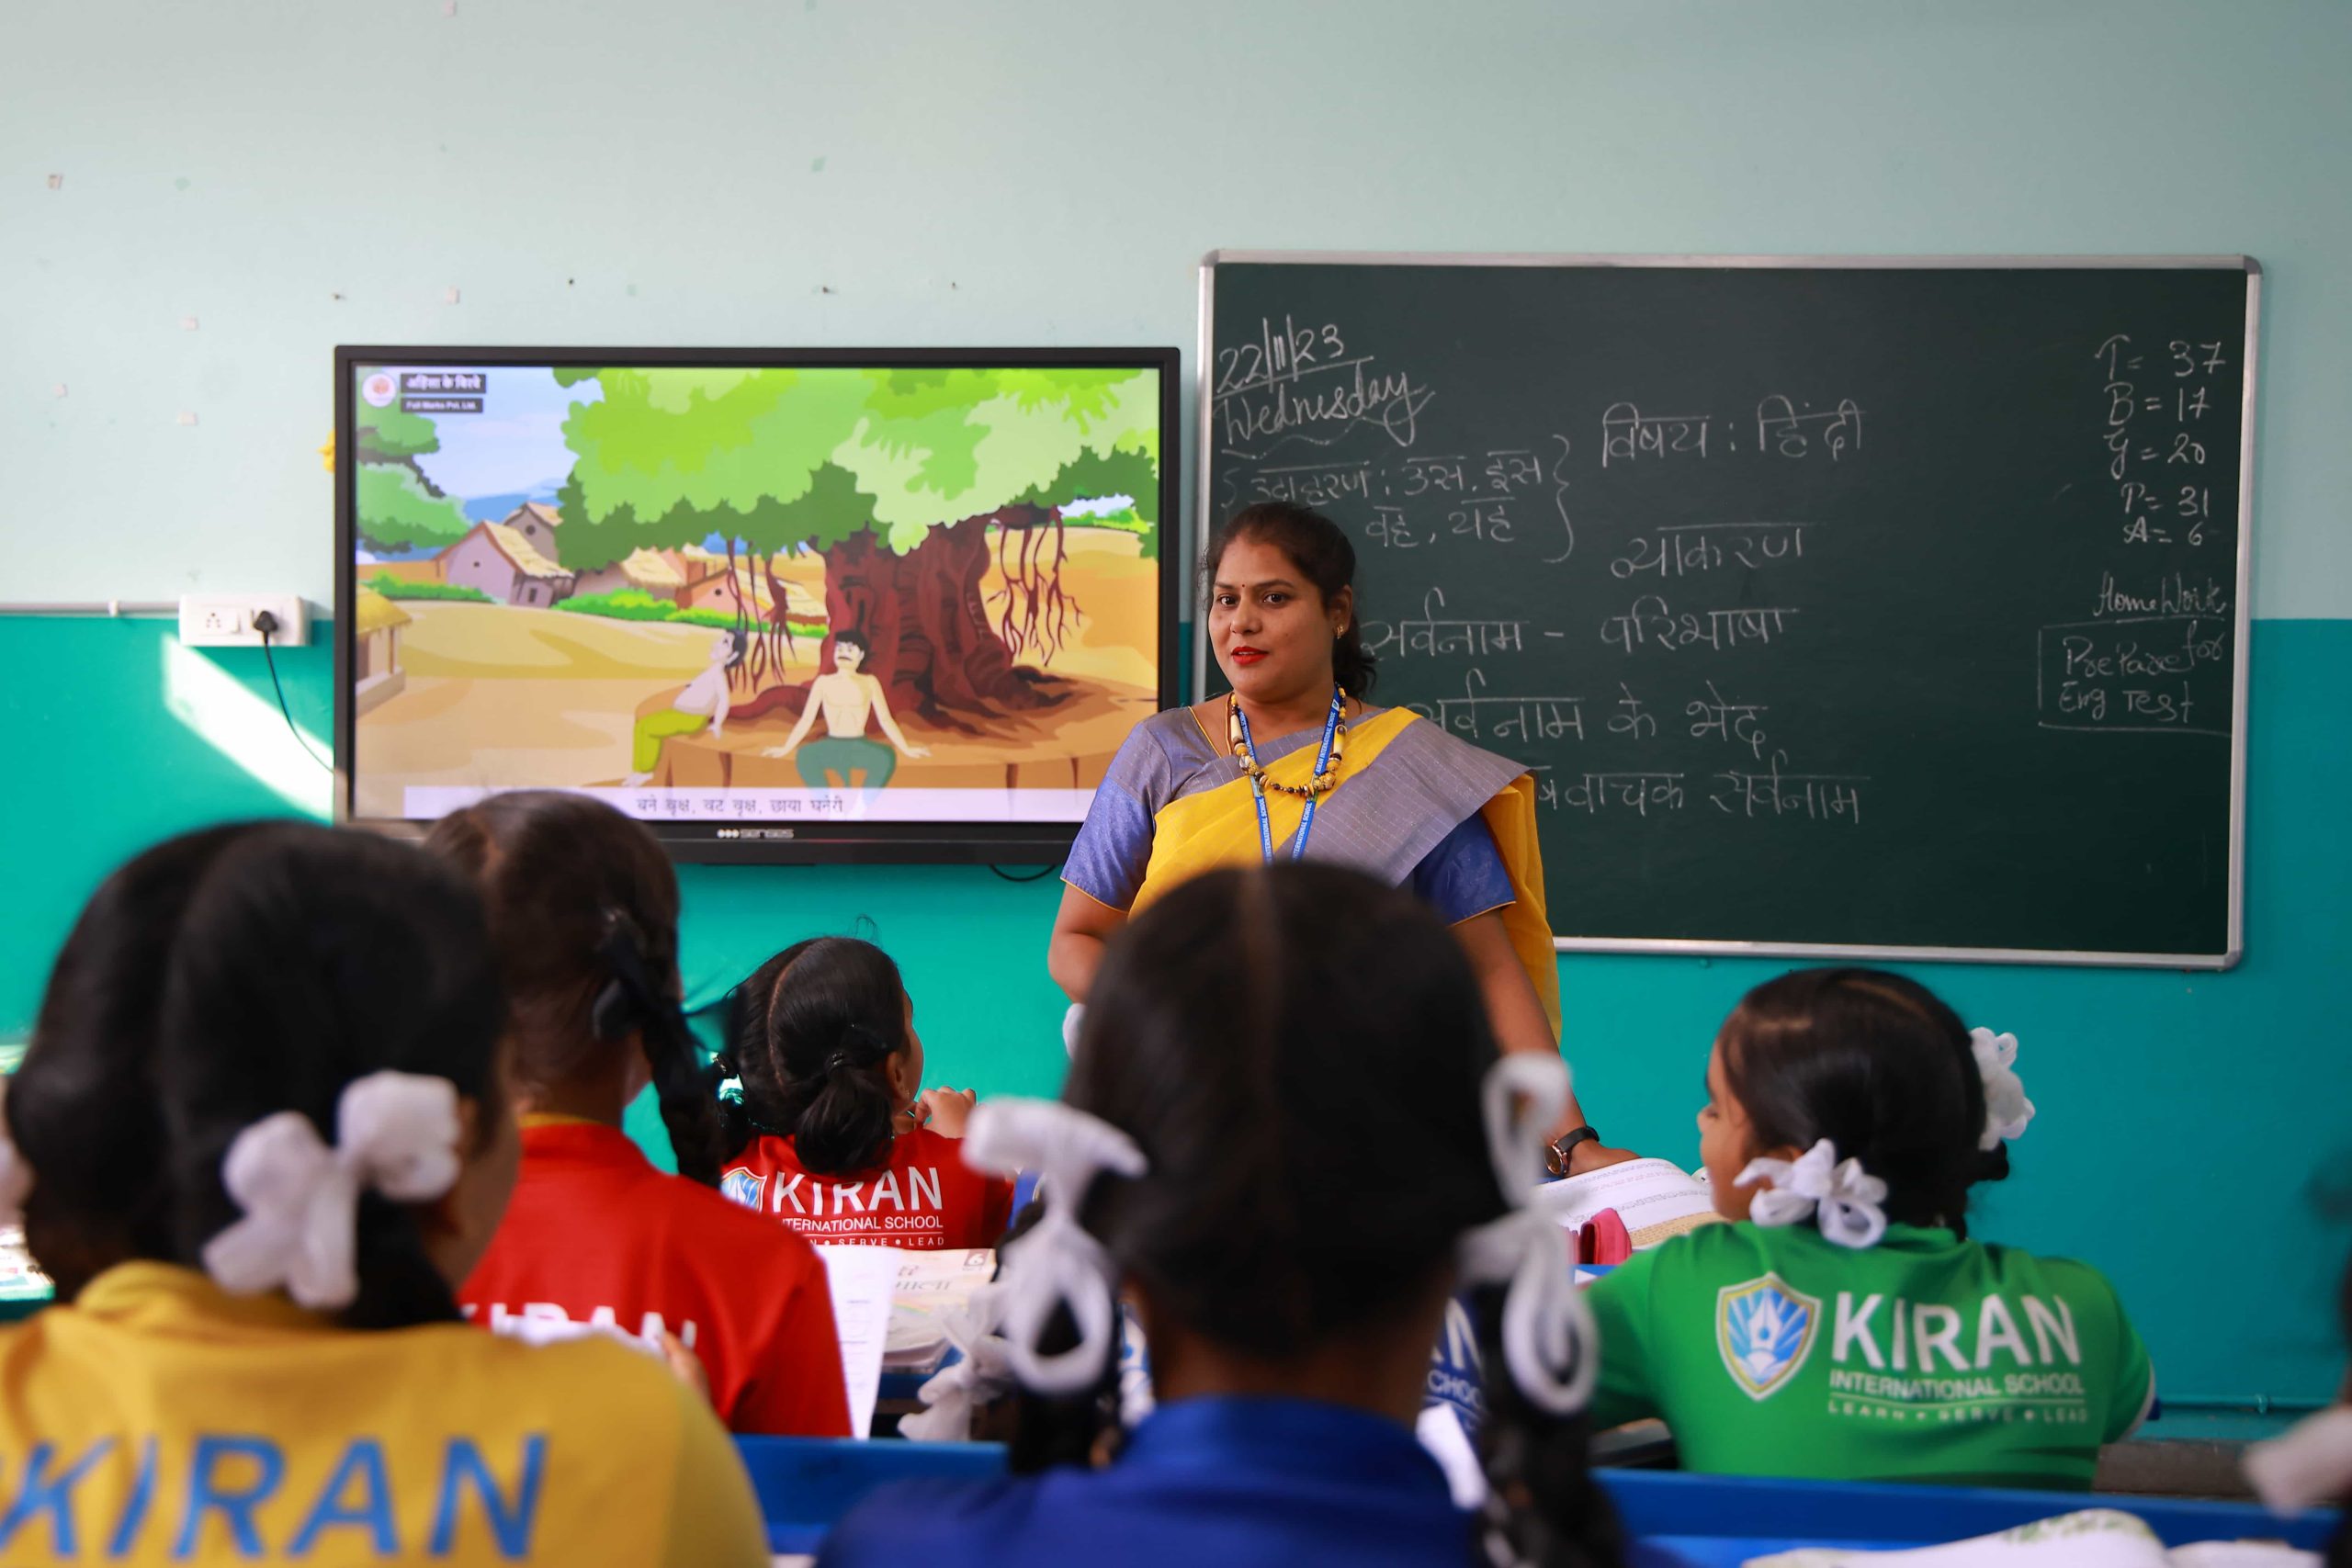 An interactive classroom scene at Kiran International School, with a teacher using aids and a digital board to facilitate engaging and modern teaching methods, enhancing the learning experience for students.